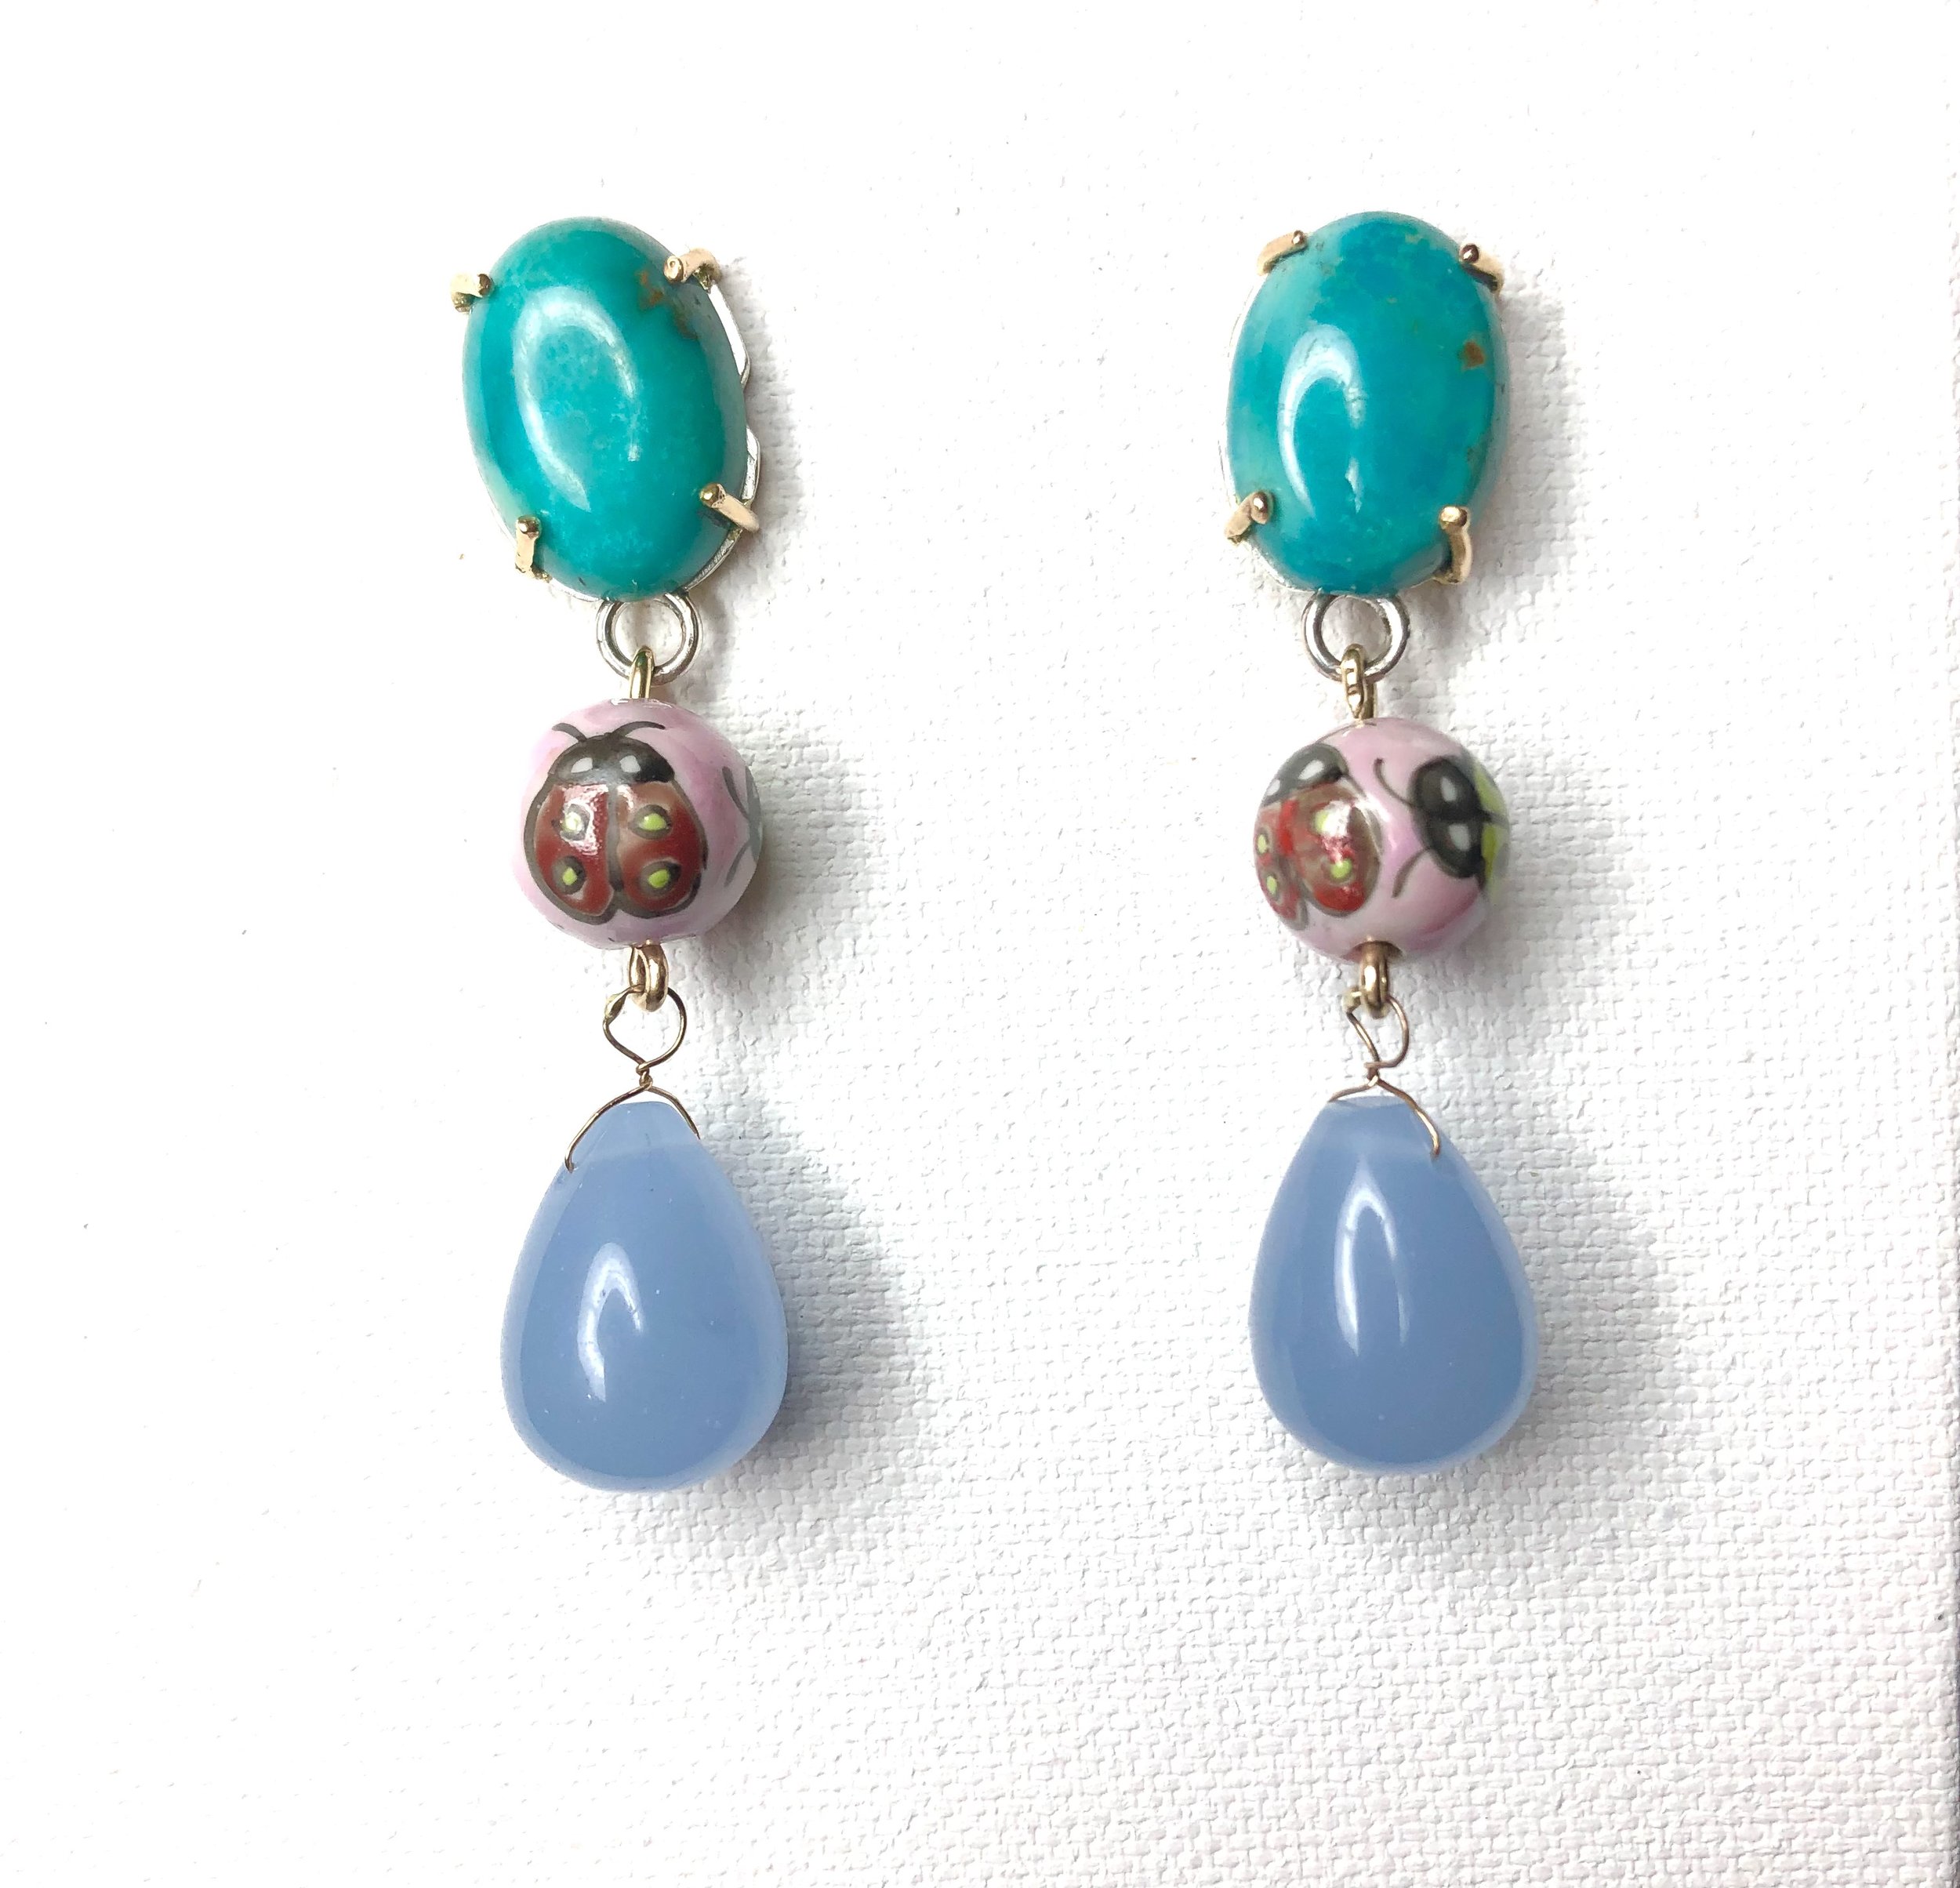  Earrings featuring green turquoise, vintage painted bead, lilac drop 